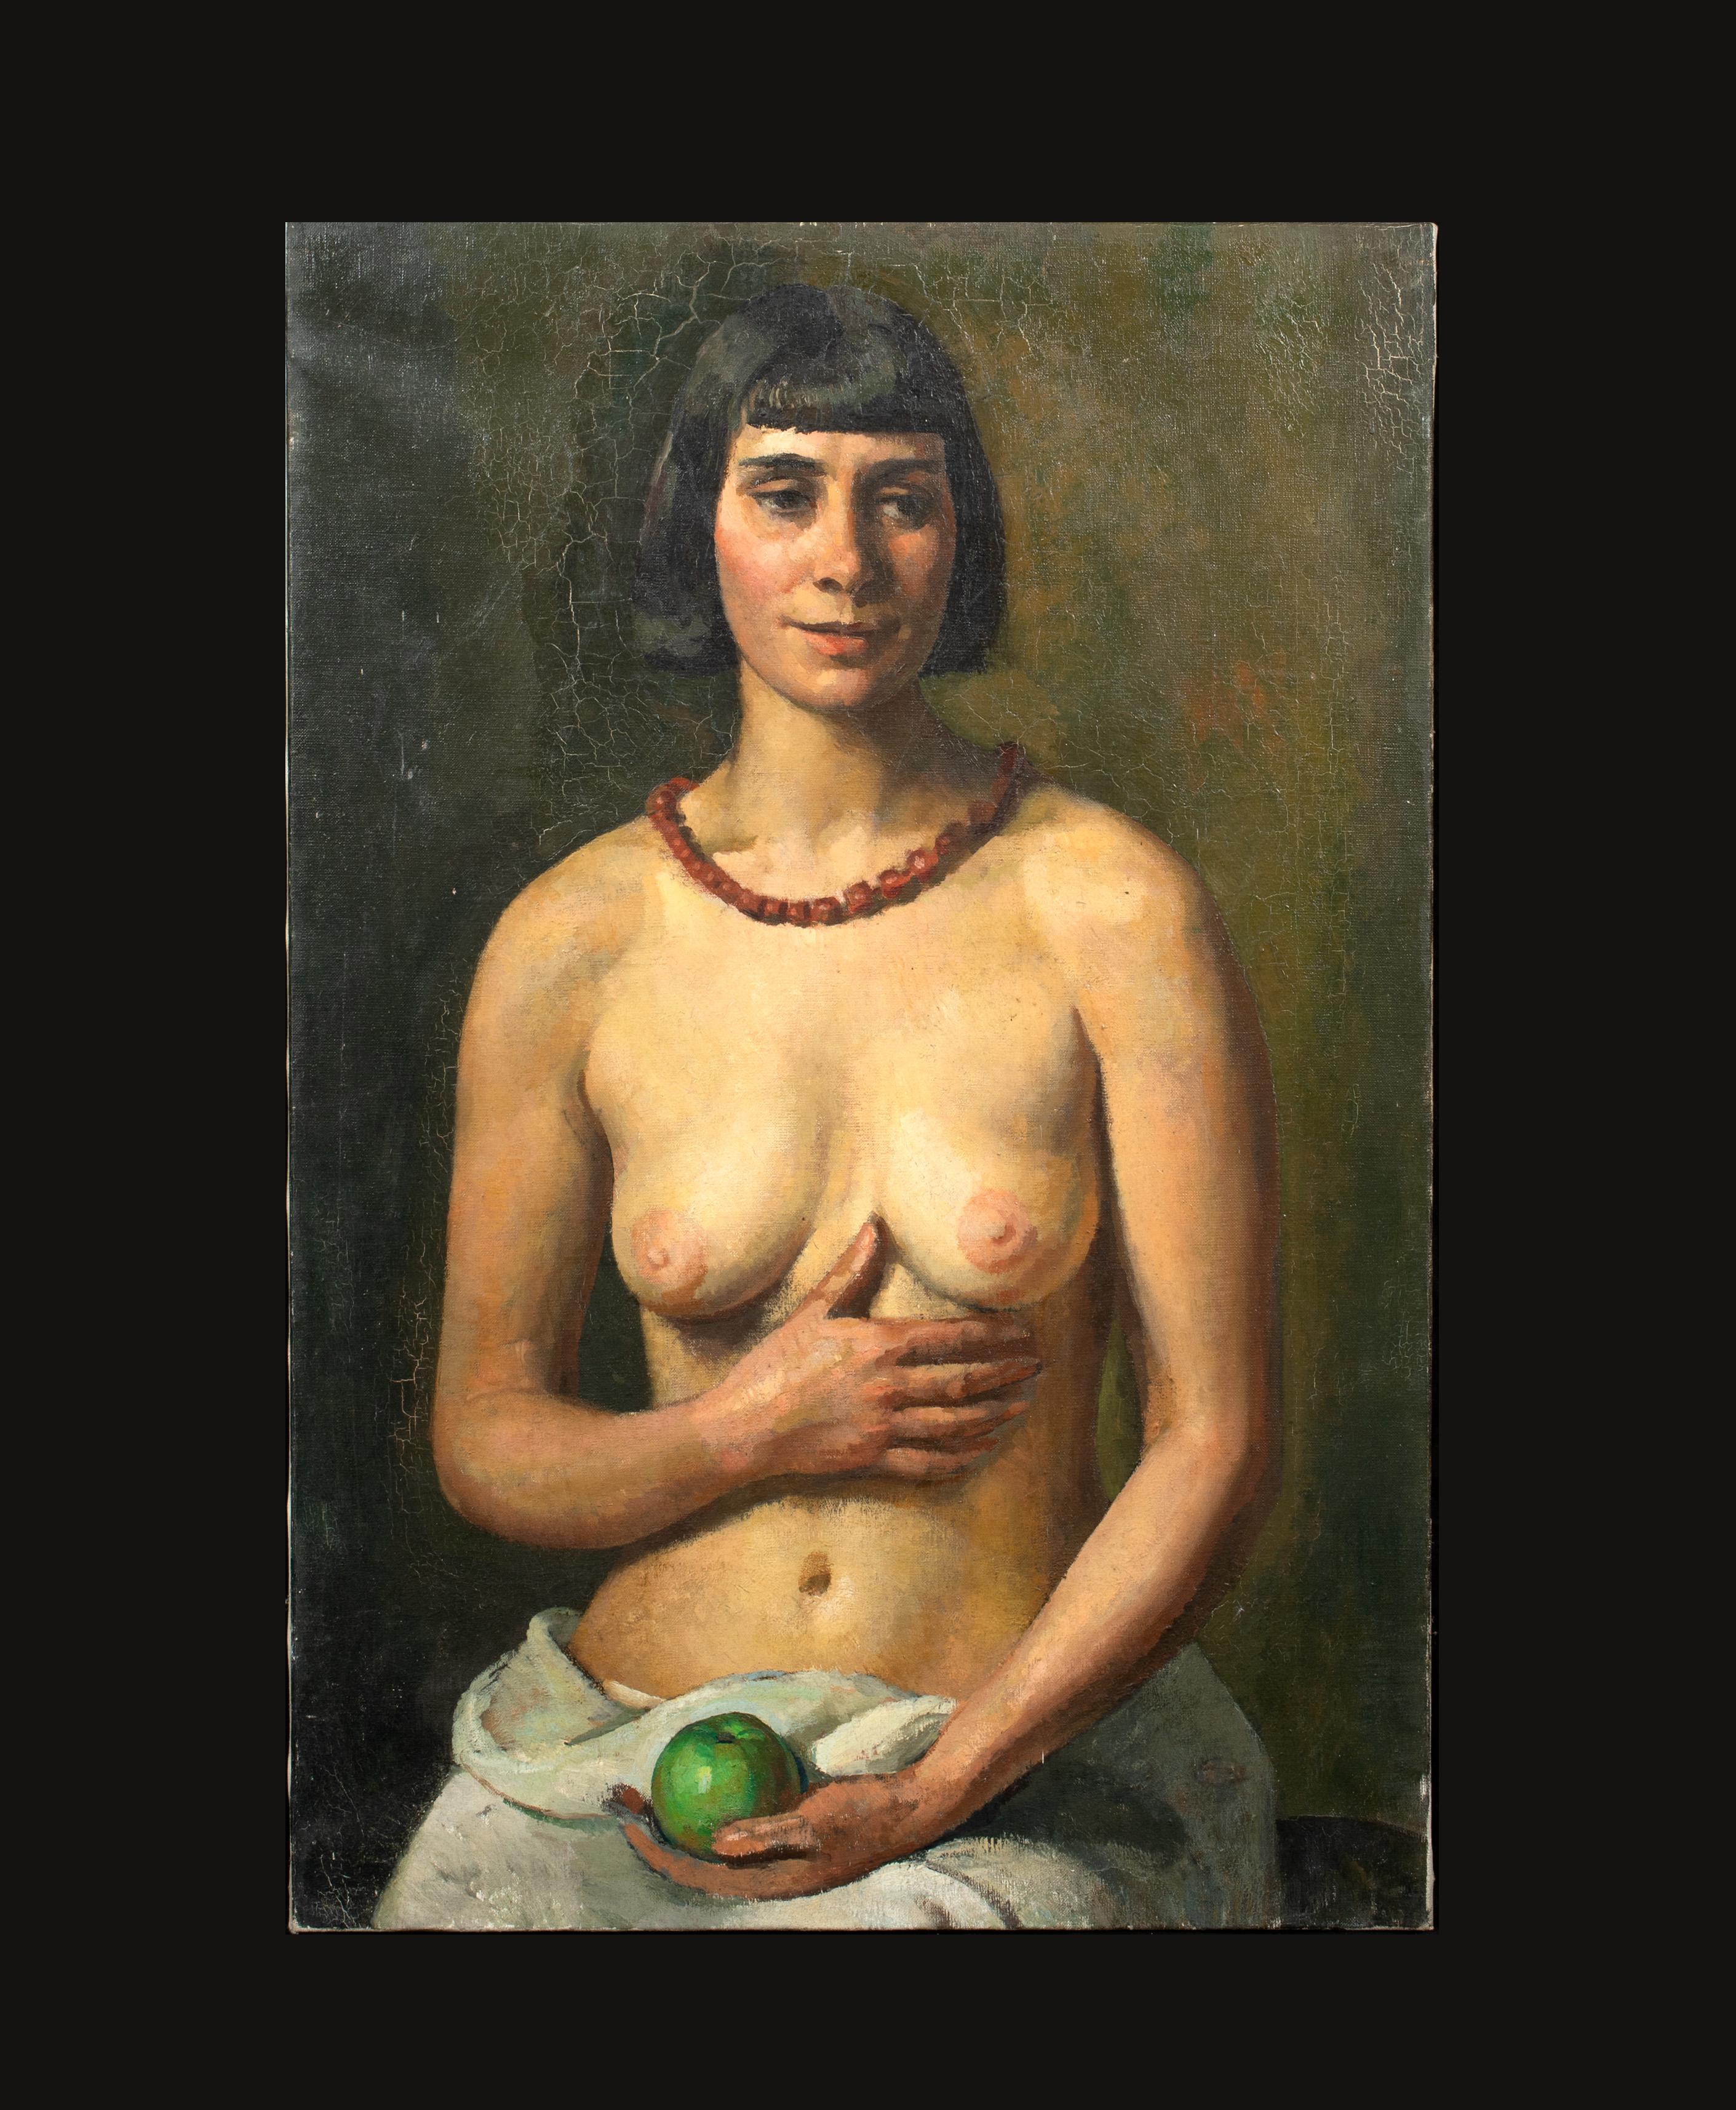 Portrait Of A Nude Holding An Apple, early 20th Century  - Black Portrait Painting by Unknown